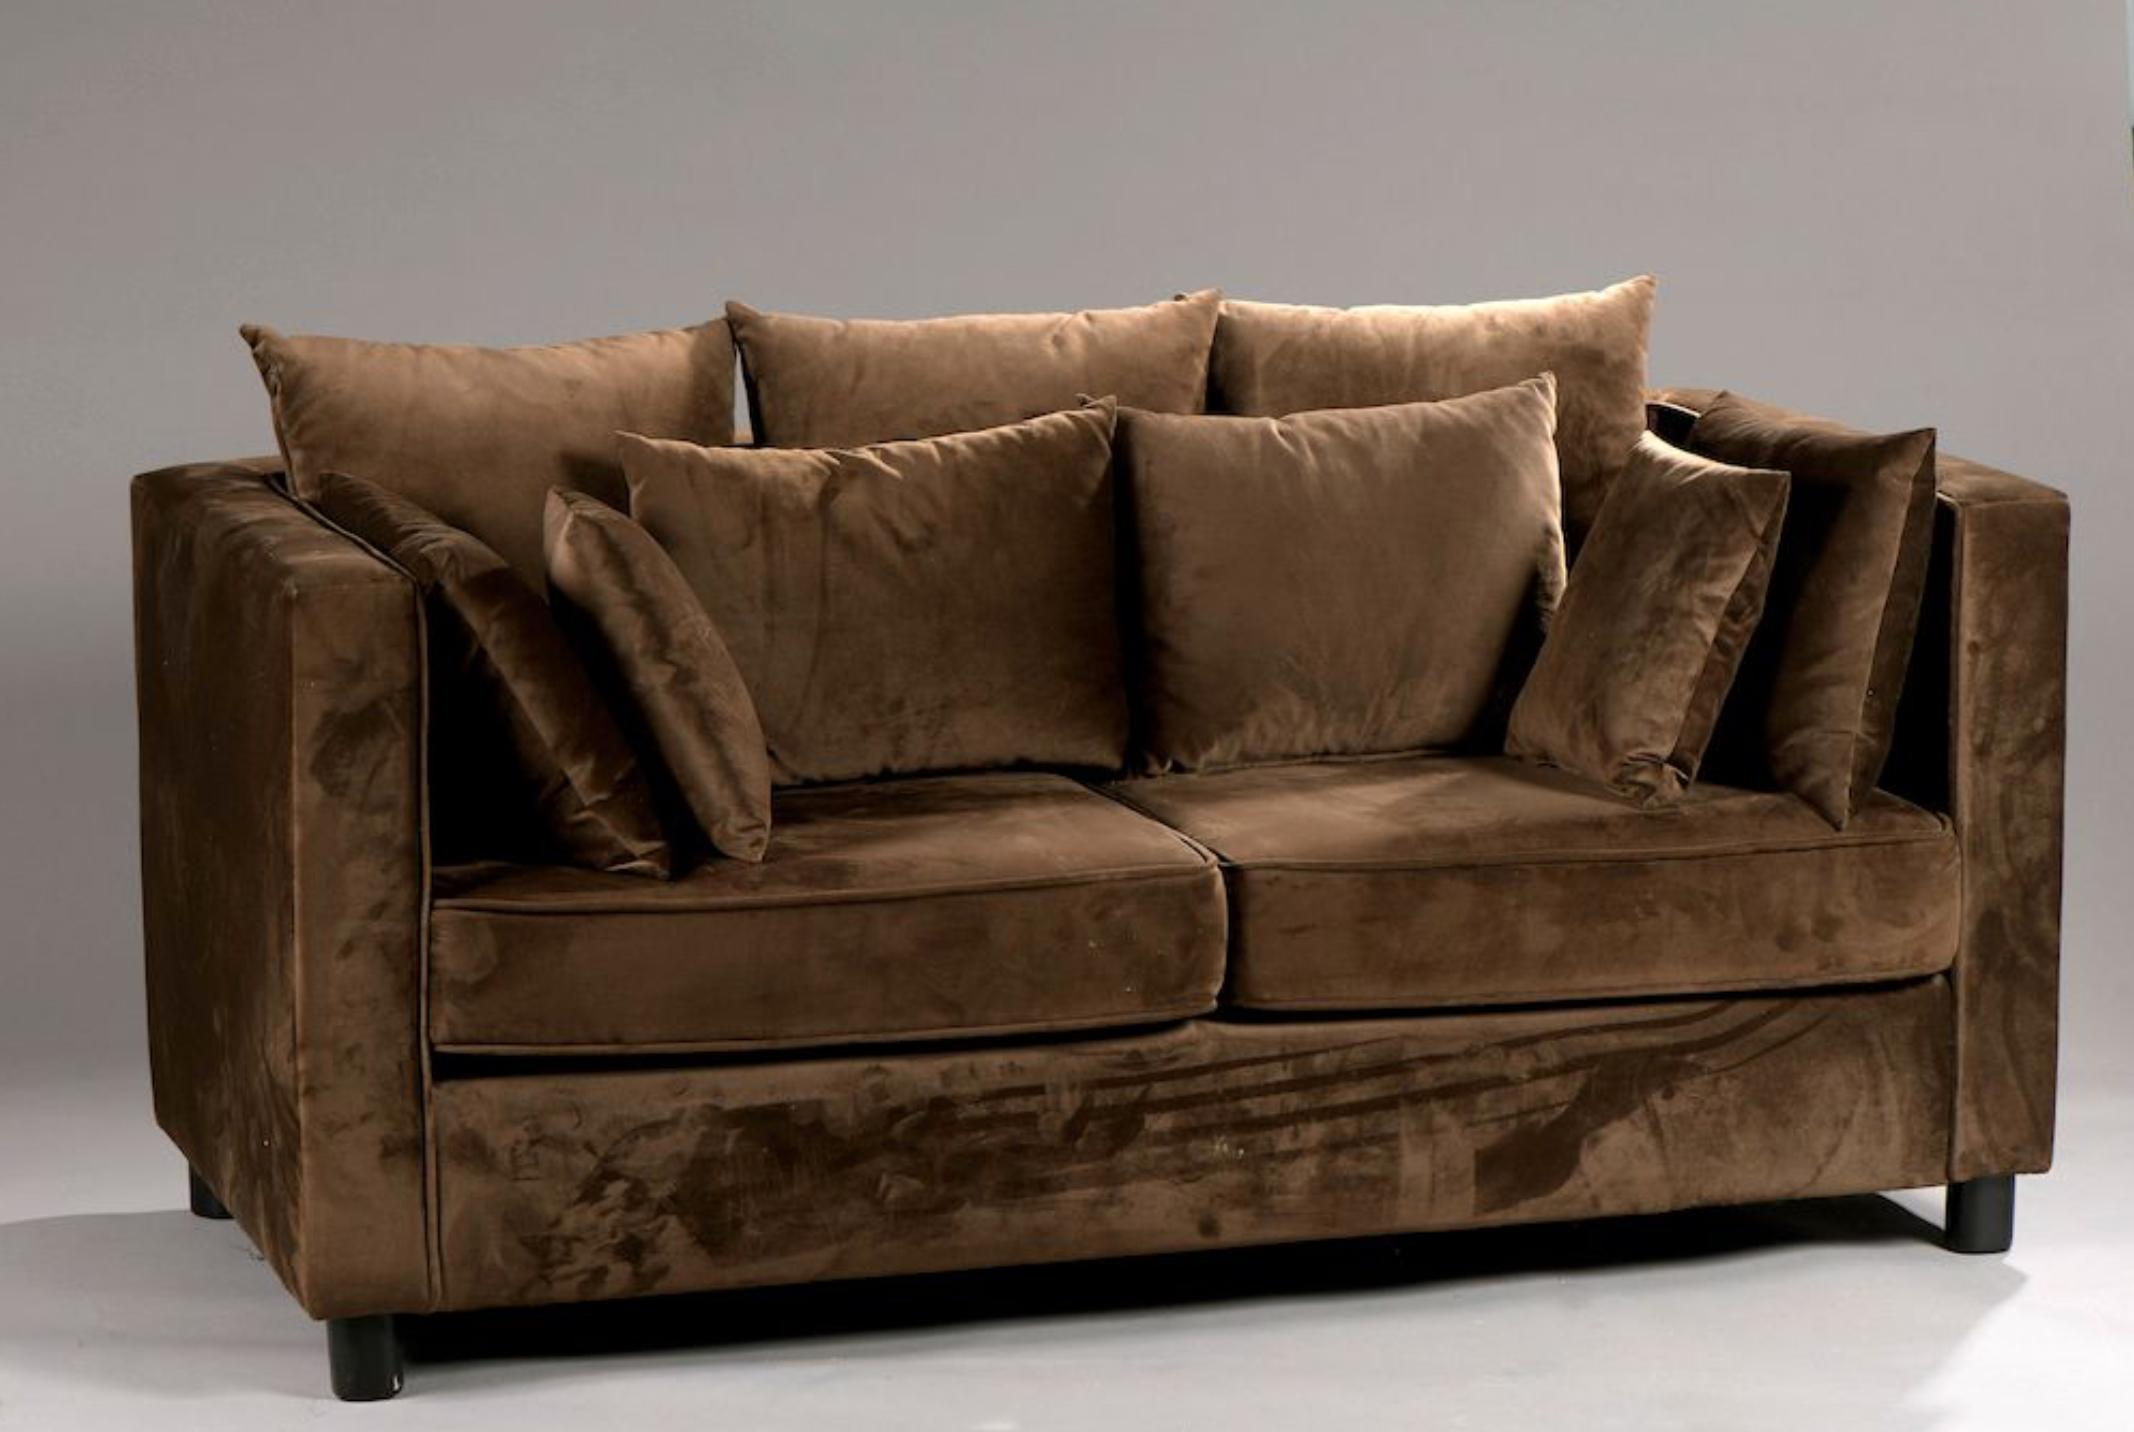 20th century velvet sofa in chocolate brown with set of cushions.
France, circa 1950.